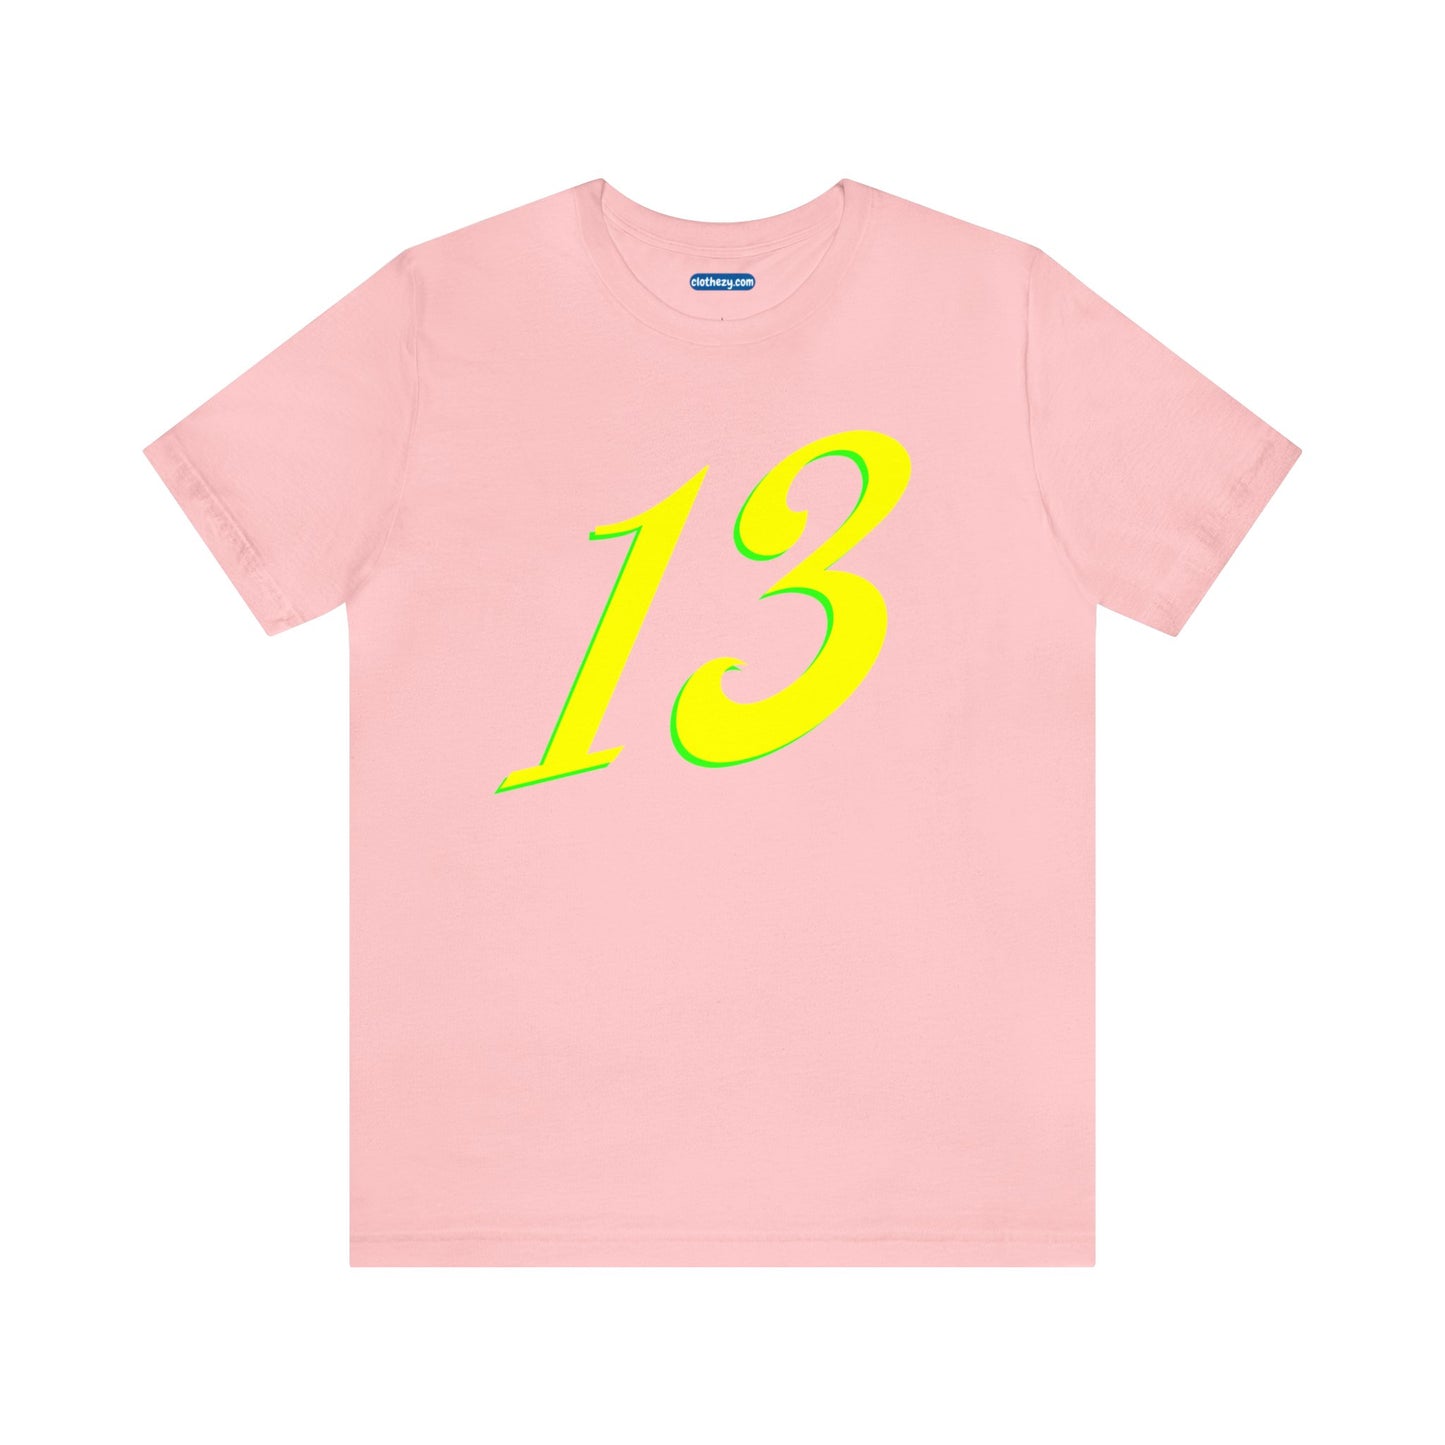 Number 13 Design - Soft Cotton Tee for birthdays and celebrations, Gift for friends and family, Multiple Options by clothezy.com in Asphalt Size Small - Buy Now